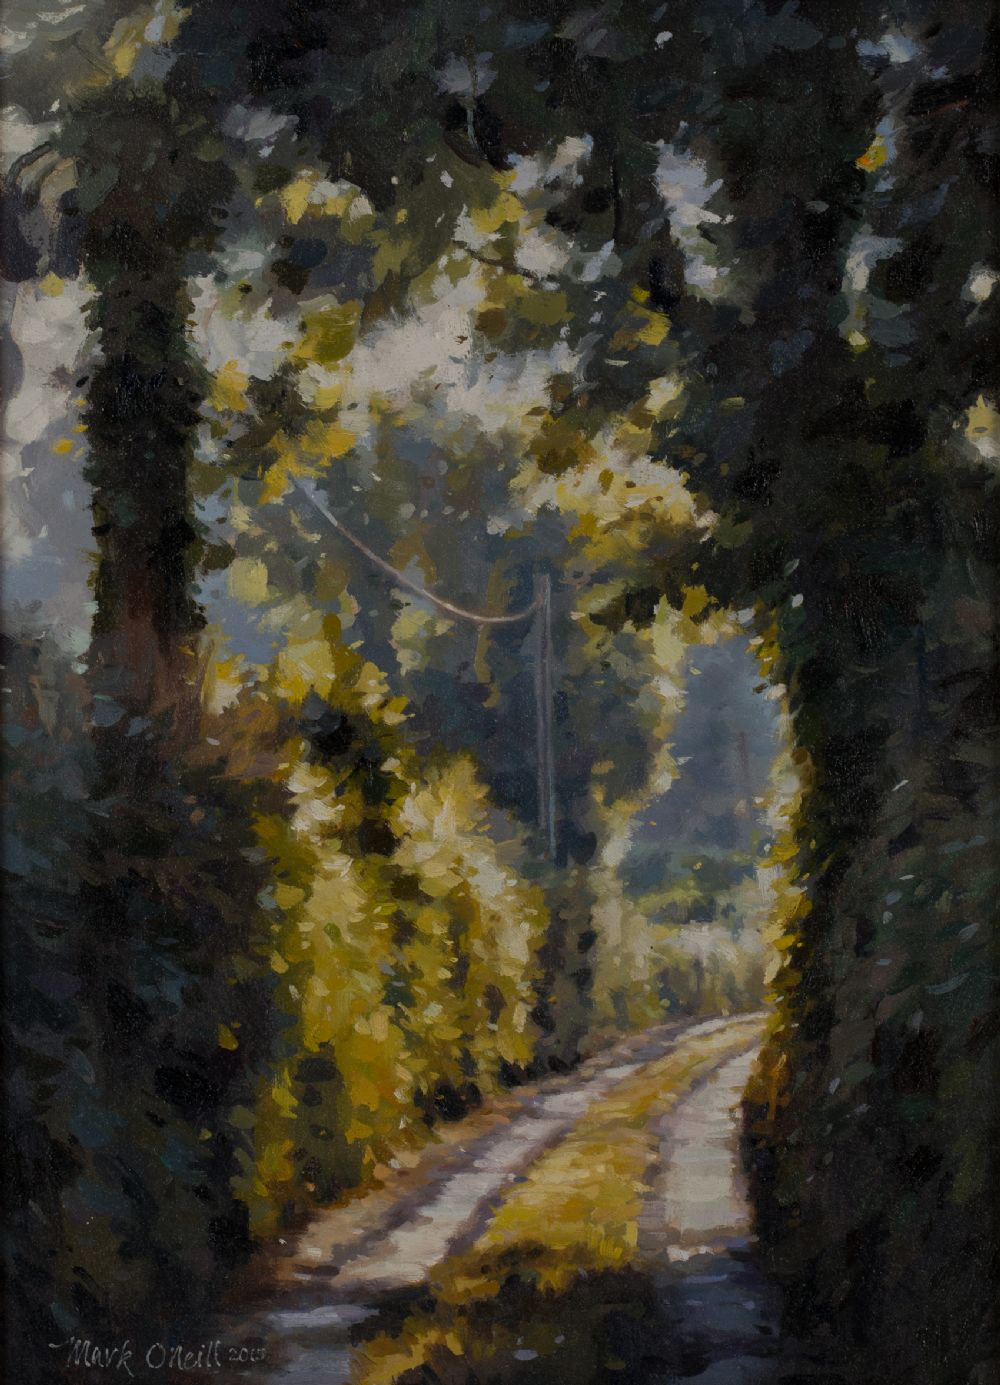 THE LIGHTED WAY by Mark O'Neill  at Dolan's Art Auction House